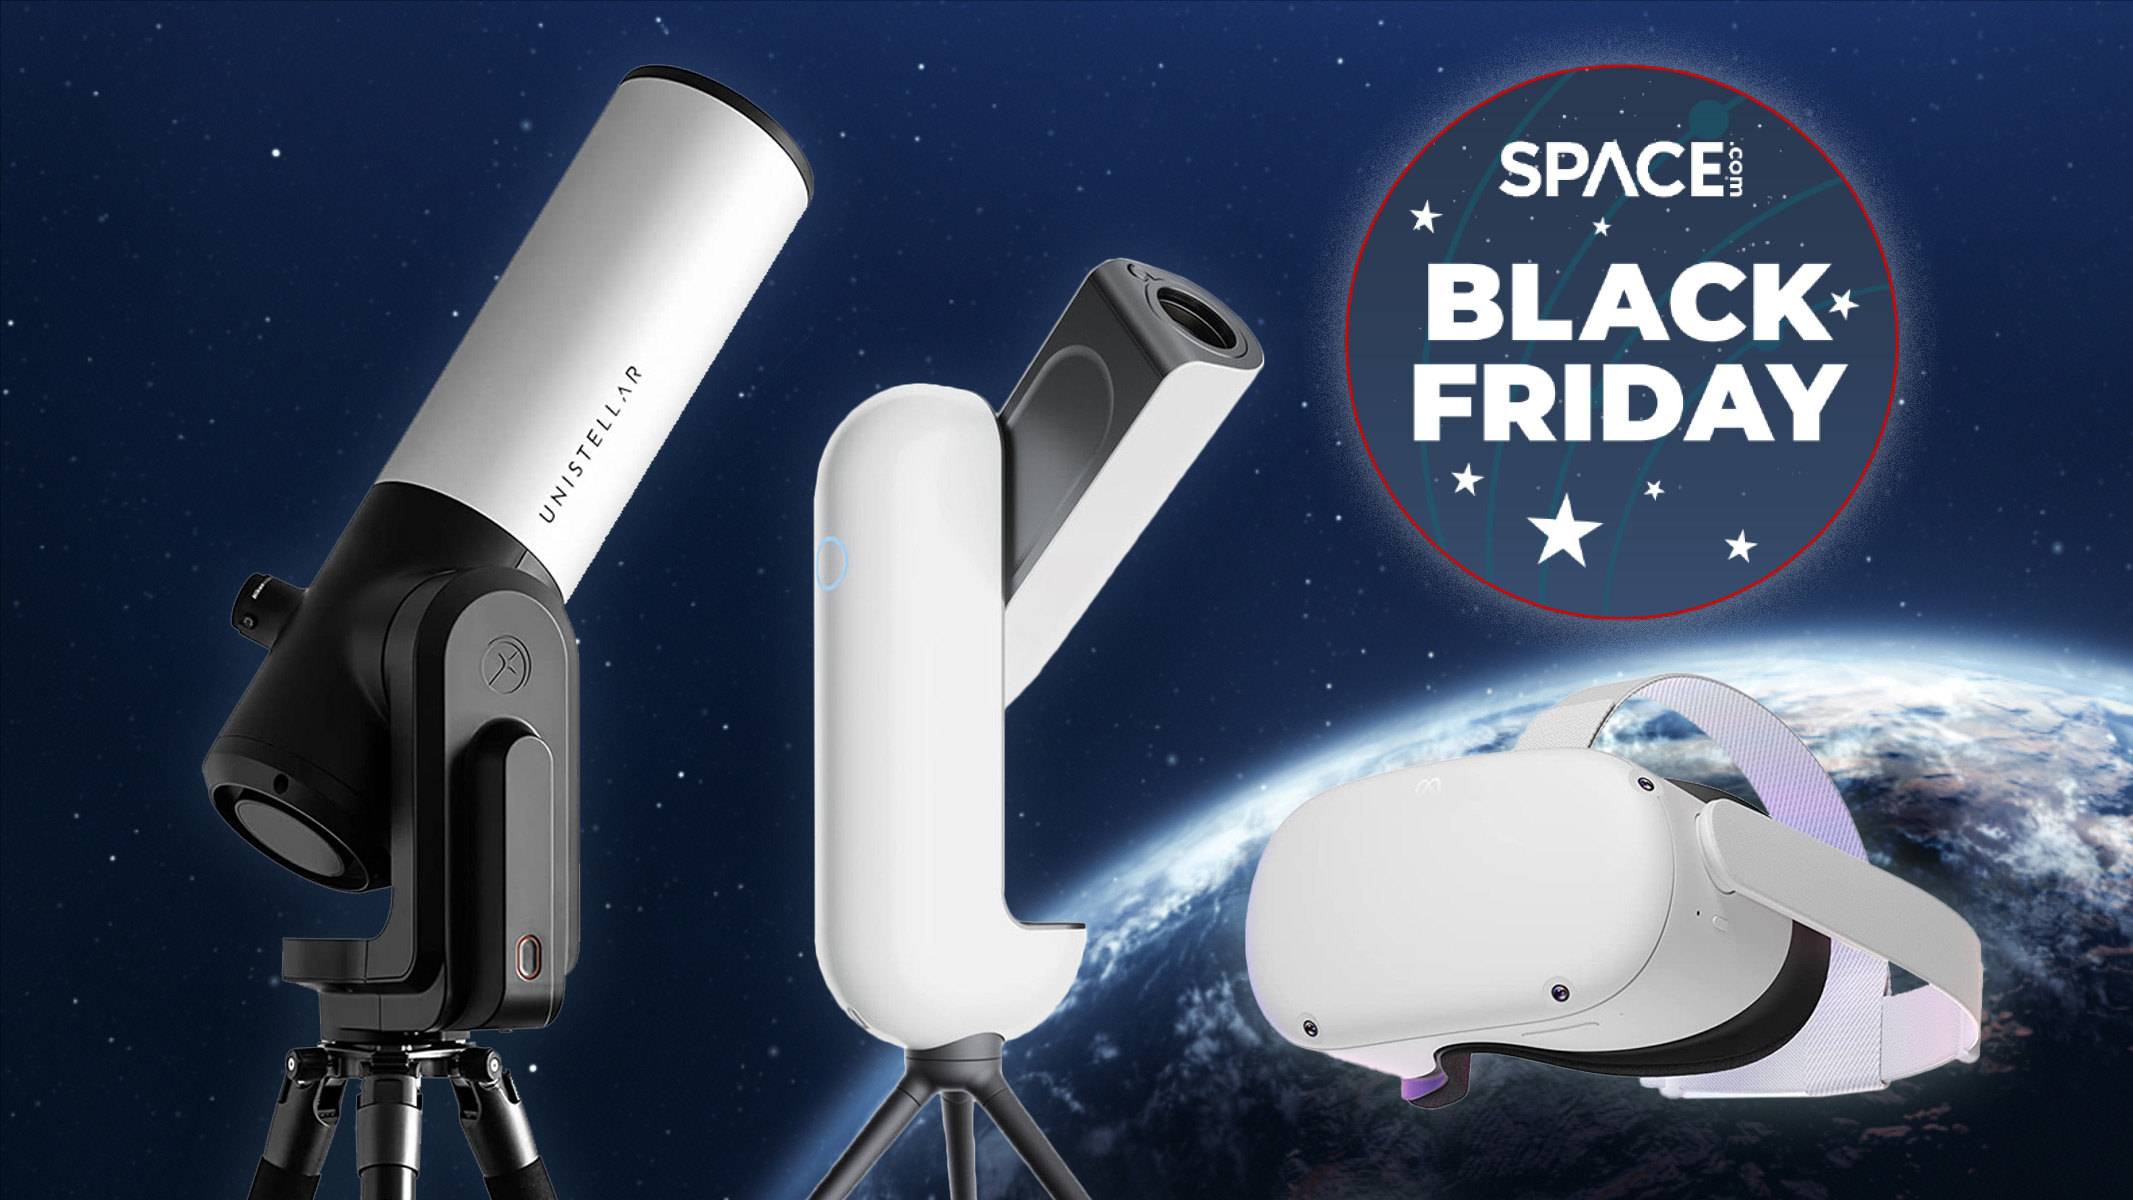 Best Space gift Black Friday deals from 2022 Space